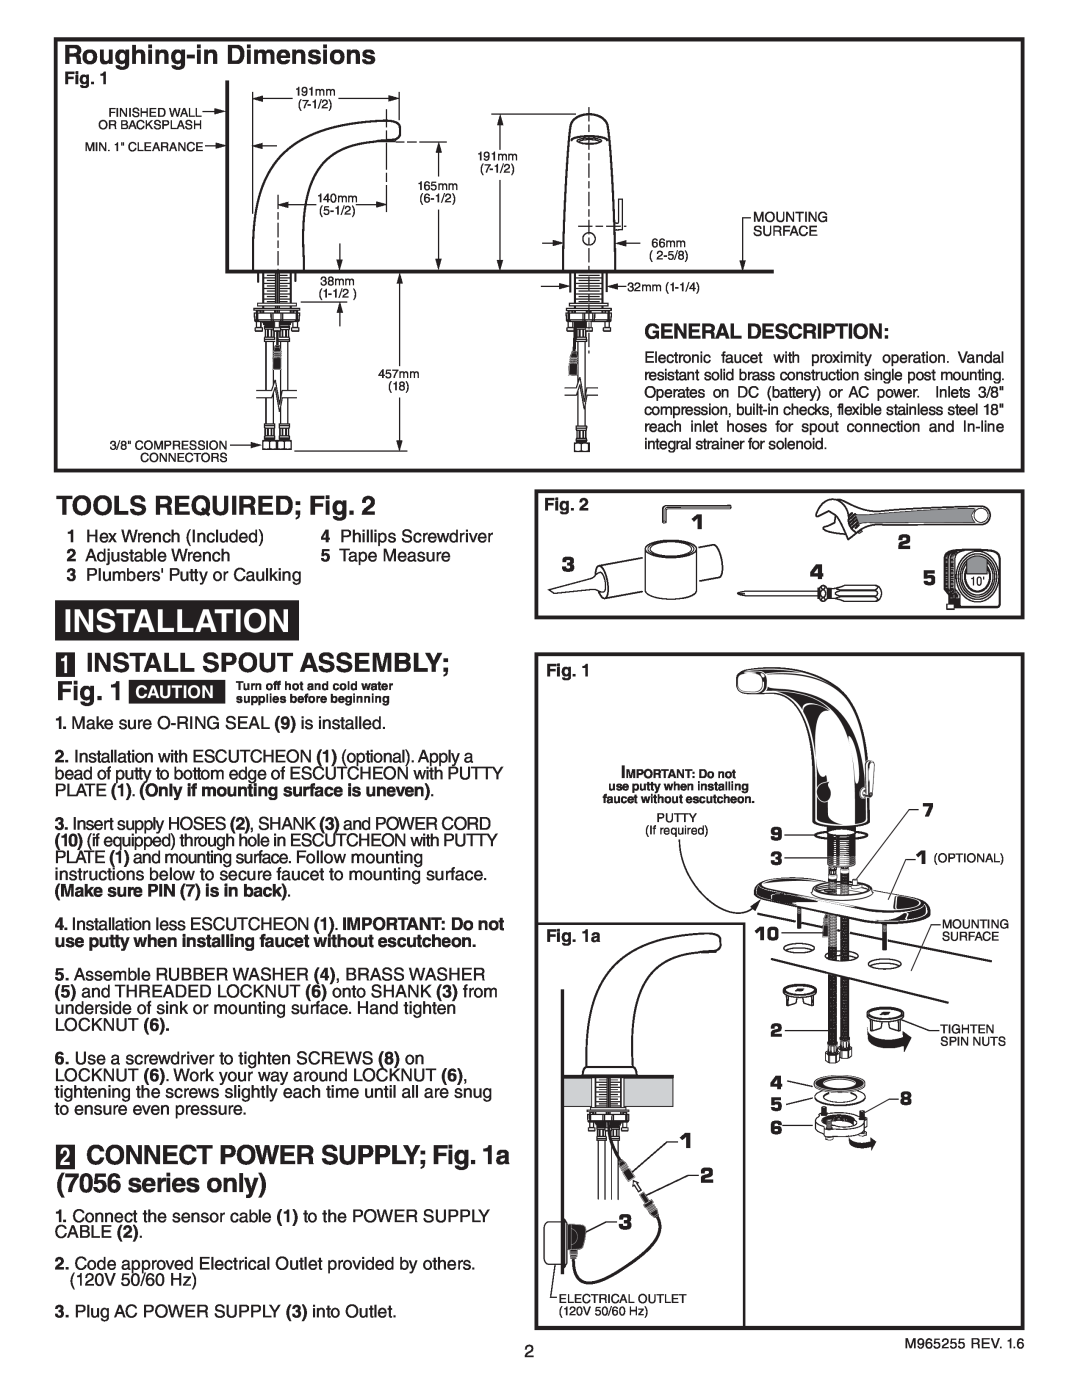 American Standard 705.215 Installation, Roughing-in Dimensions, TOOLS REQUIRED Fig, Install Spout Assembly, Caution 